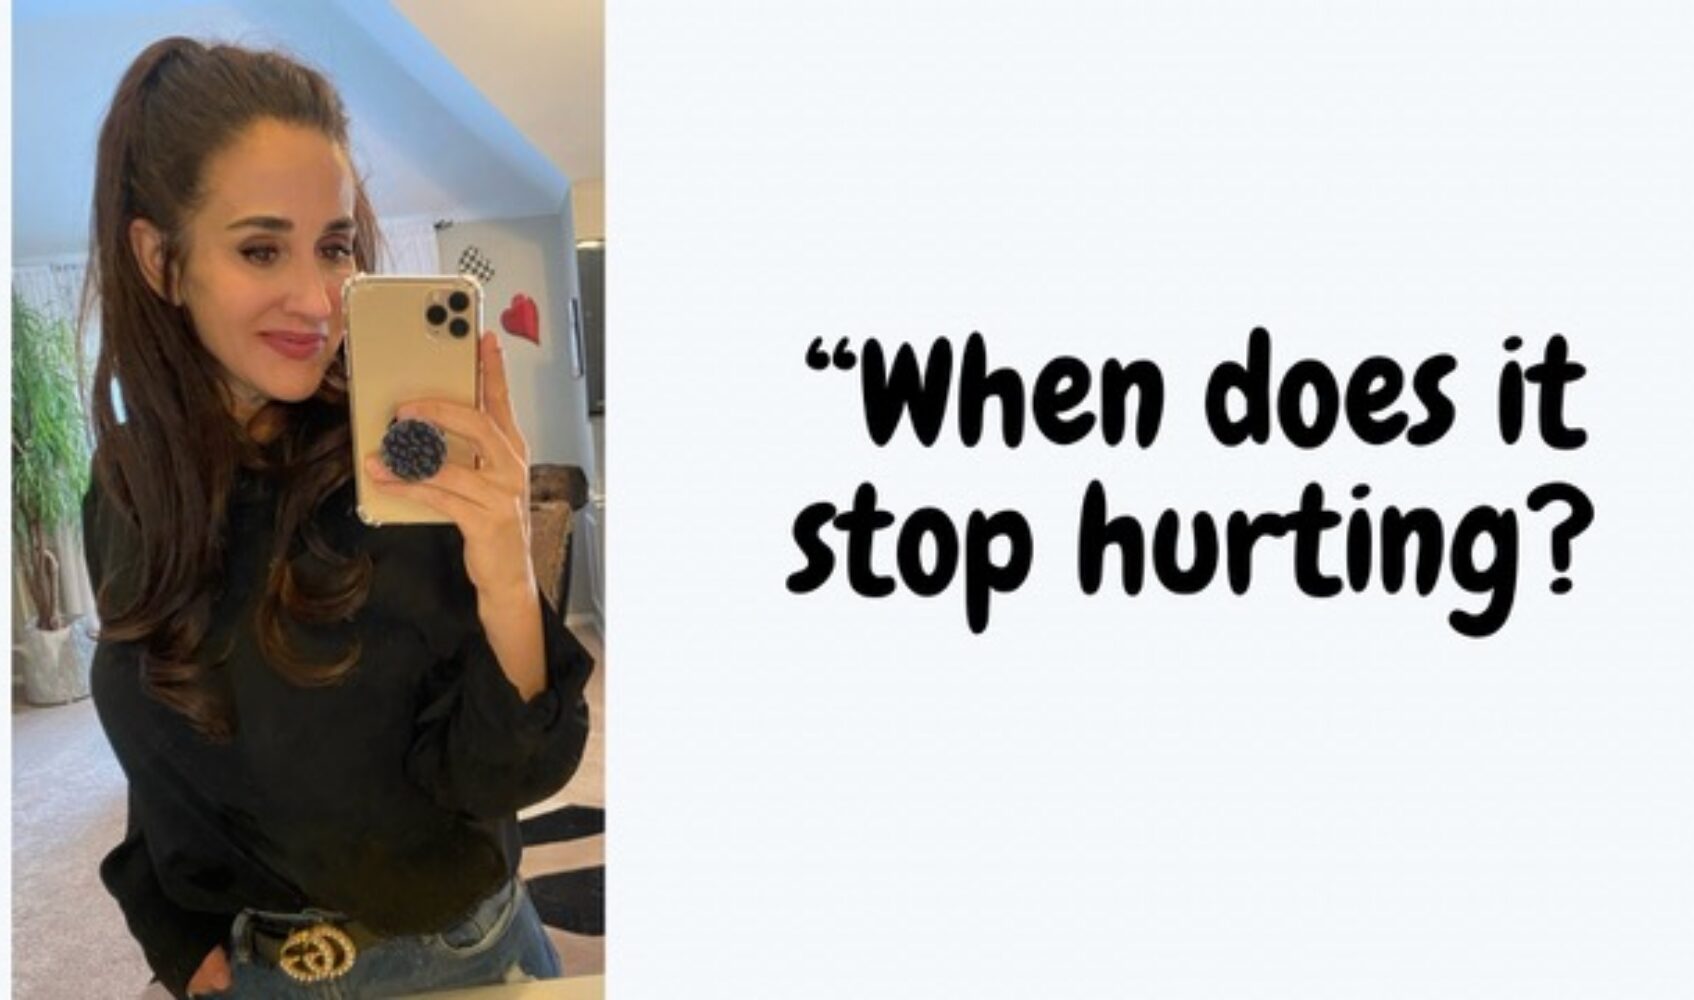 When does it stop hurting?